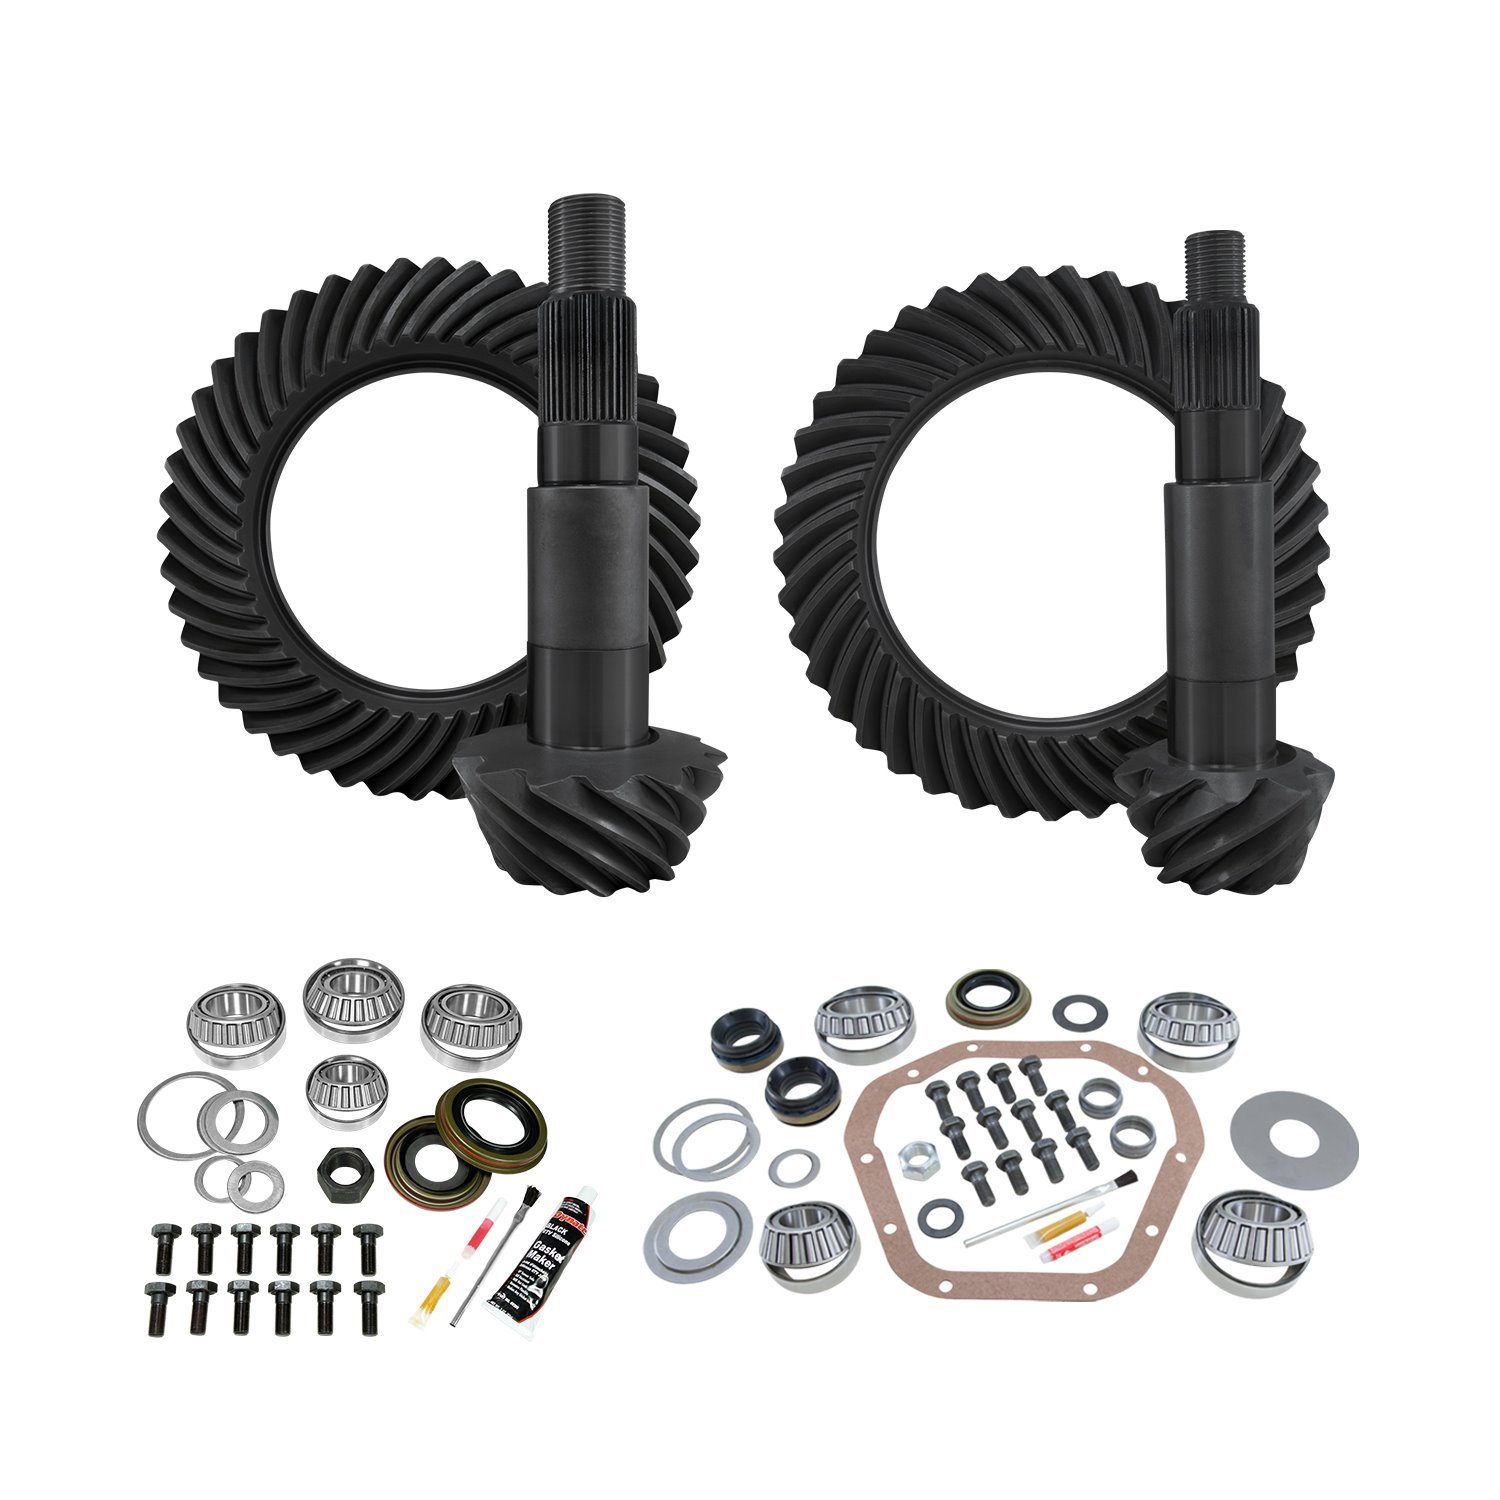 Re-Gear & Install Kit, D60 Reverse/Thick Front, D80 Rear, Ford F350, 4.88